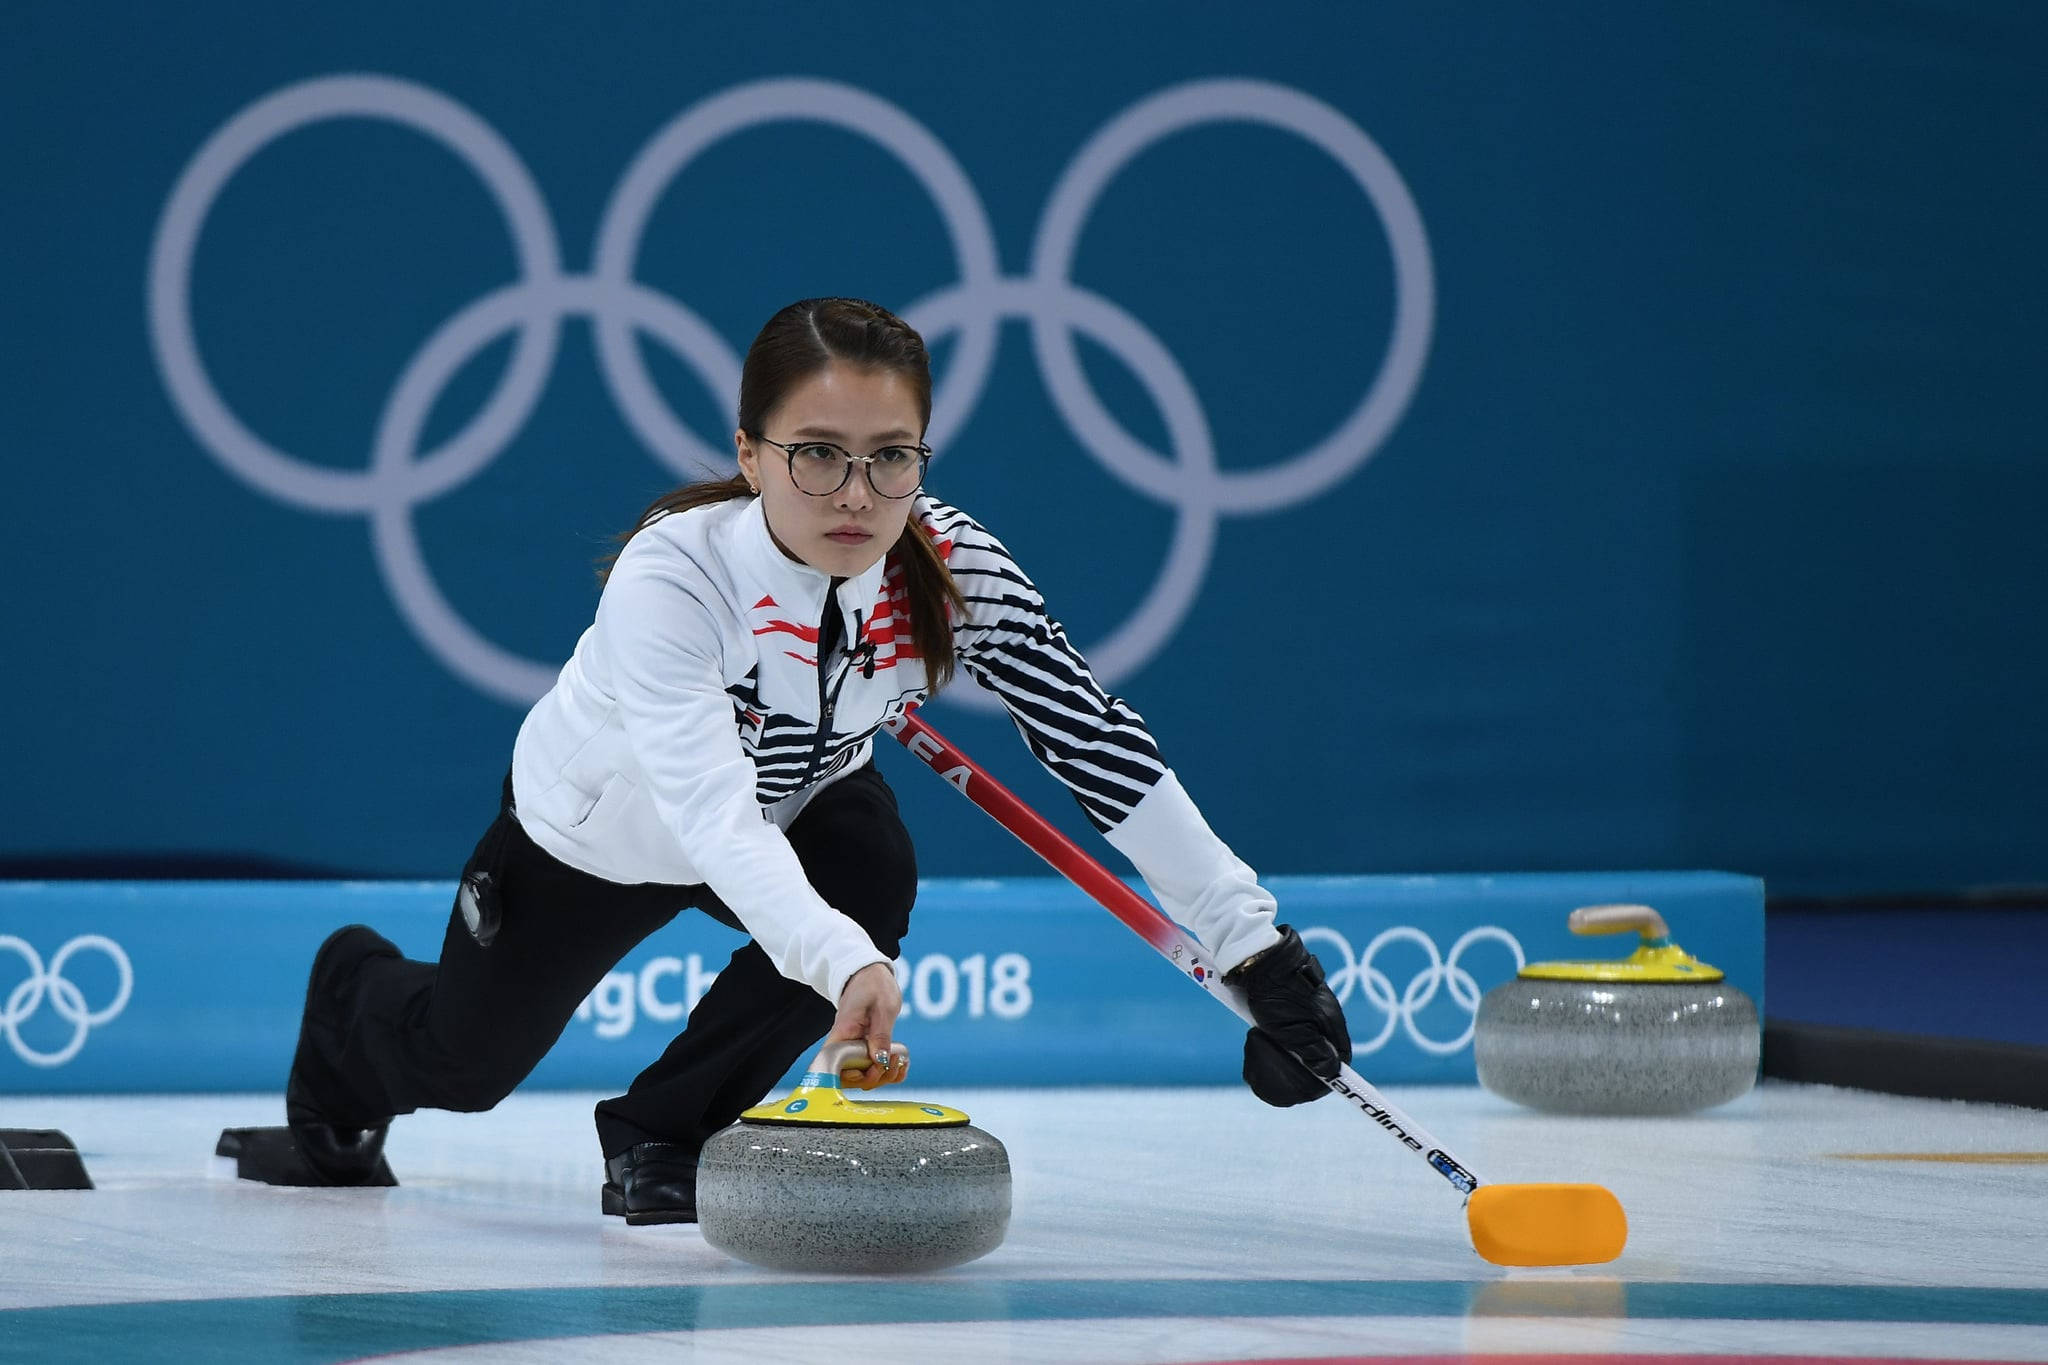 Download Female Curling Athlete At The Winter Olympics Wallpaper